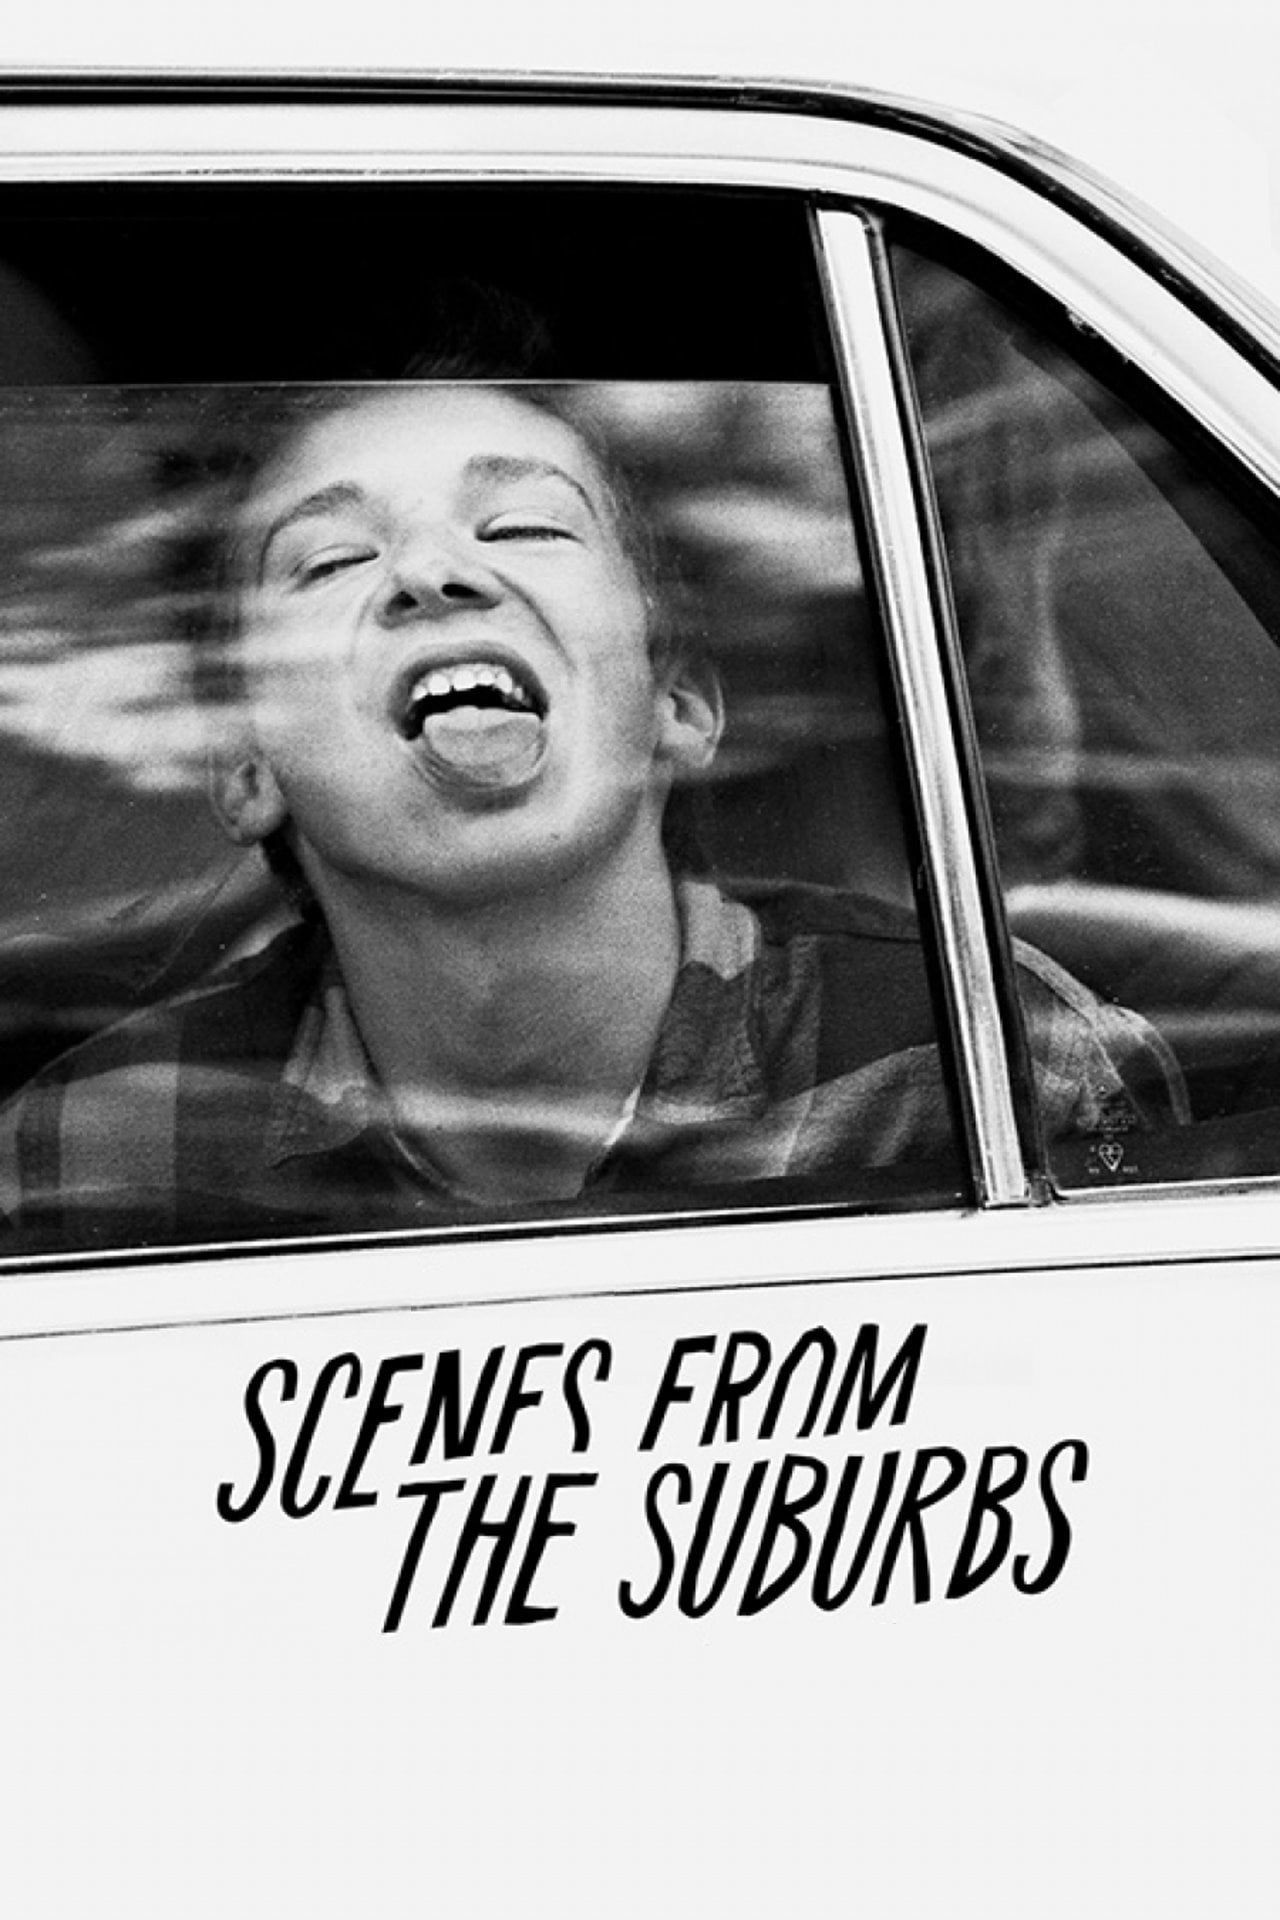 Scenes from the Suburbs film